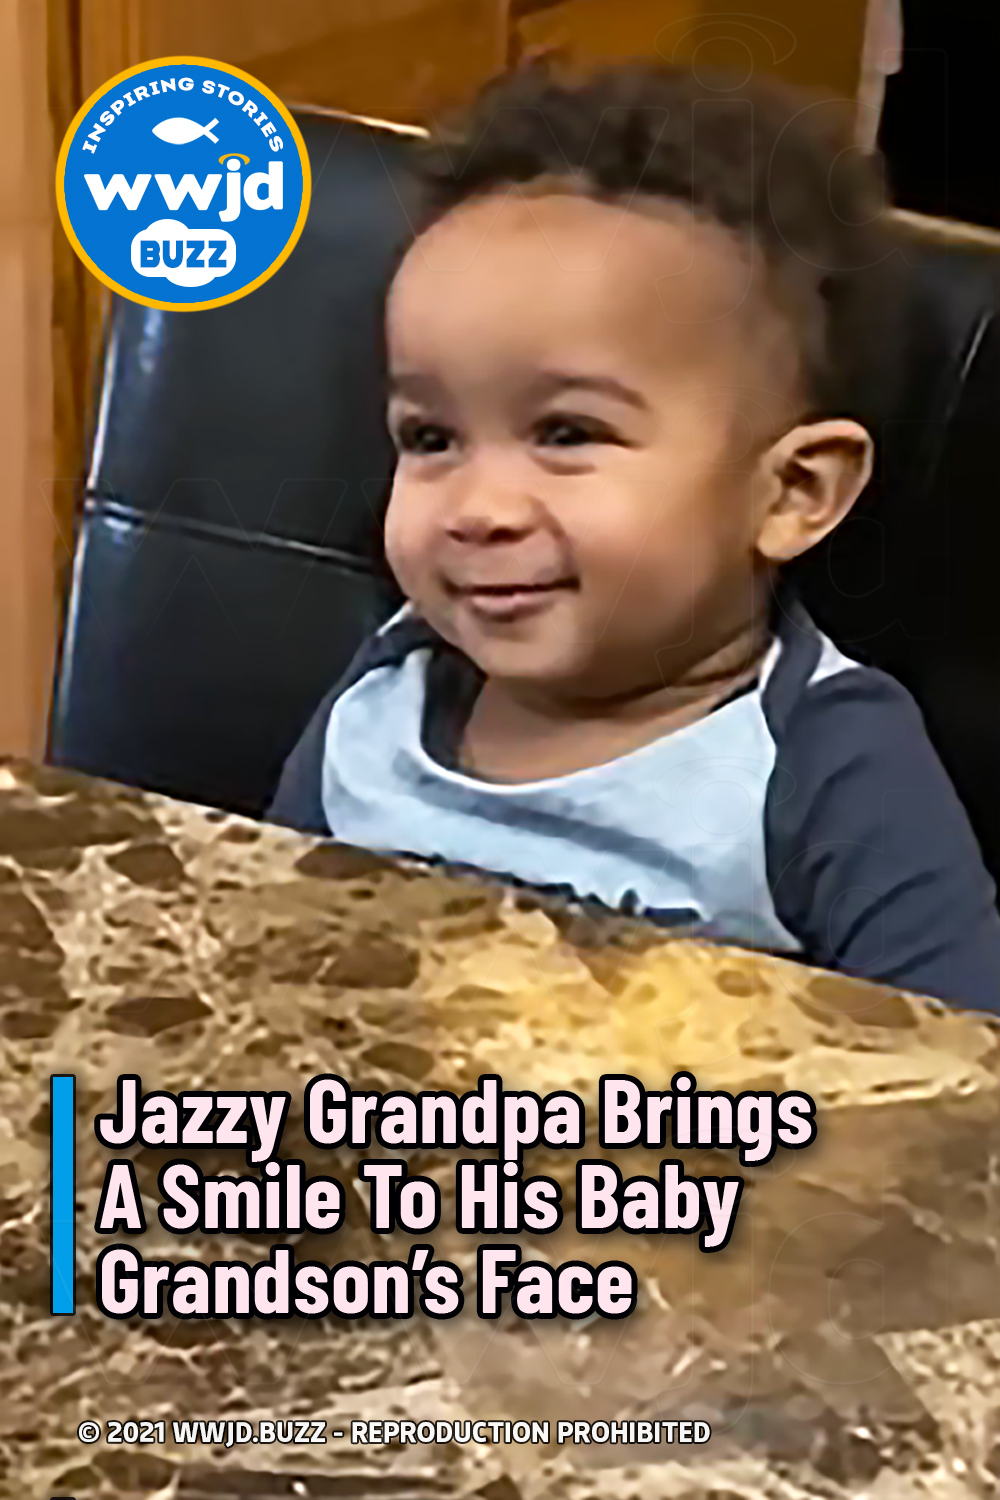 Jazzy Grandpa Brings A Smile To His Baby Grandson’s Face